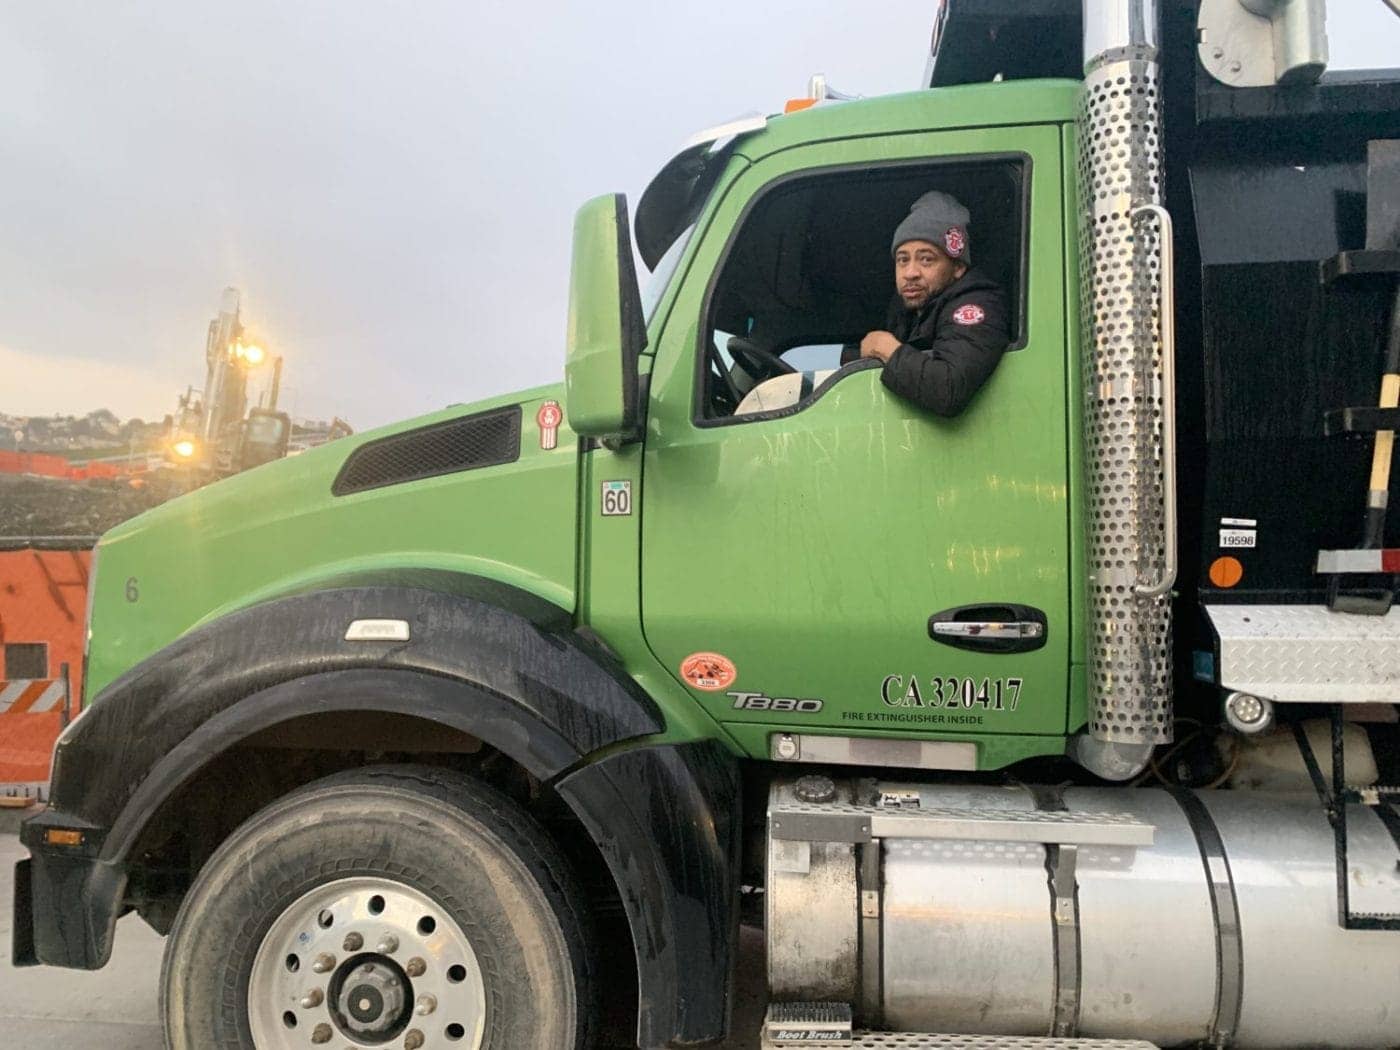 Keith-Smith-Kali-of-Global-Team-Corporation-in-truck-121422-1400x1050, <strong>Black contractors: ‘We want to put our community to work’</strong>, Local News & Views 